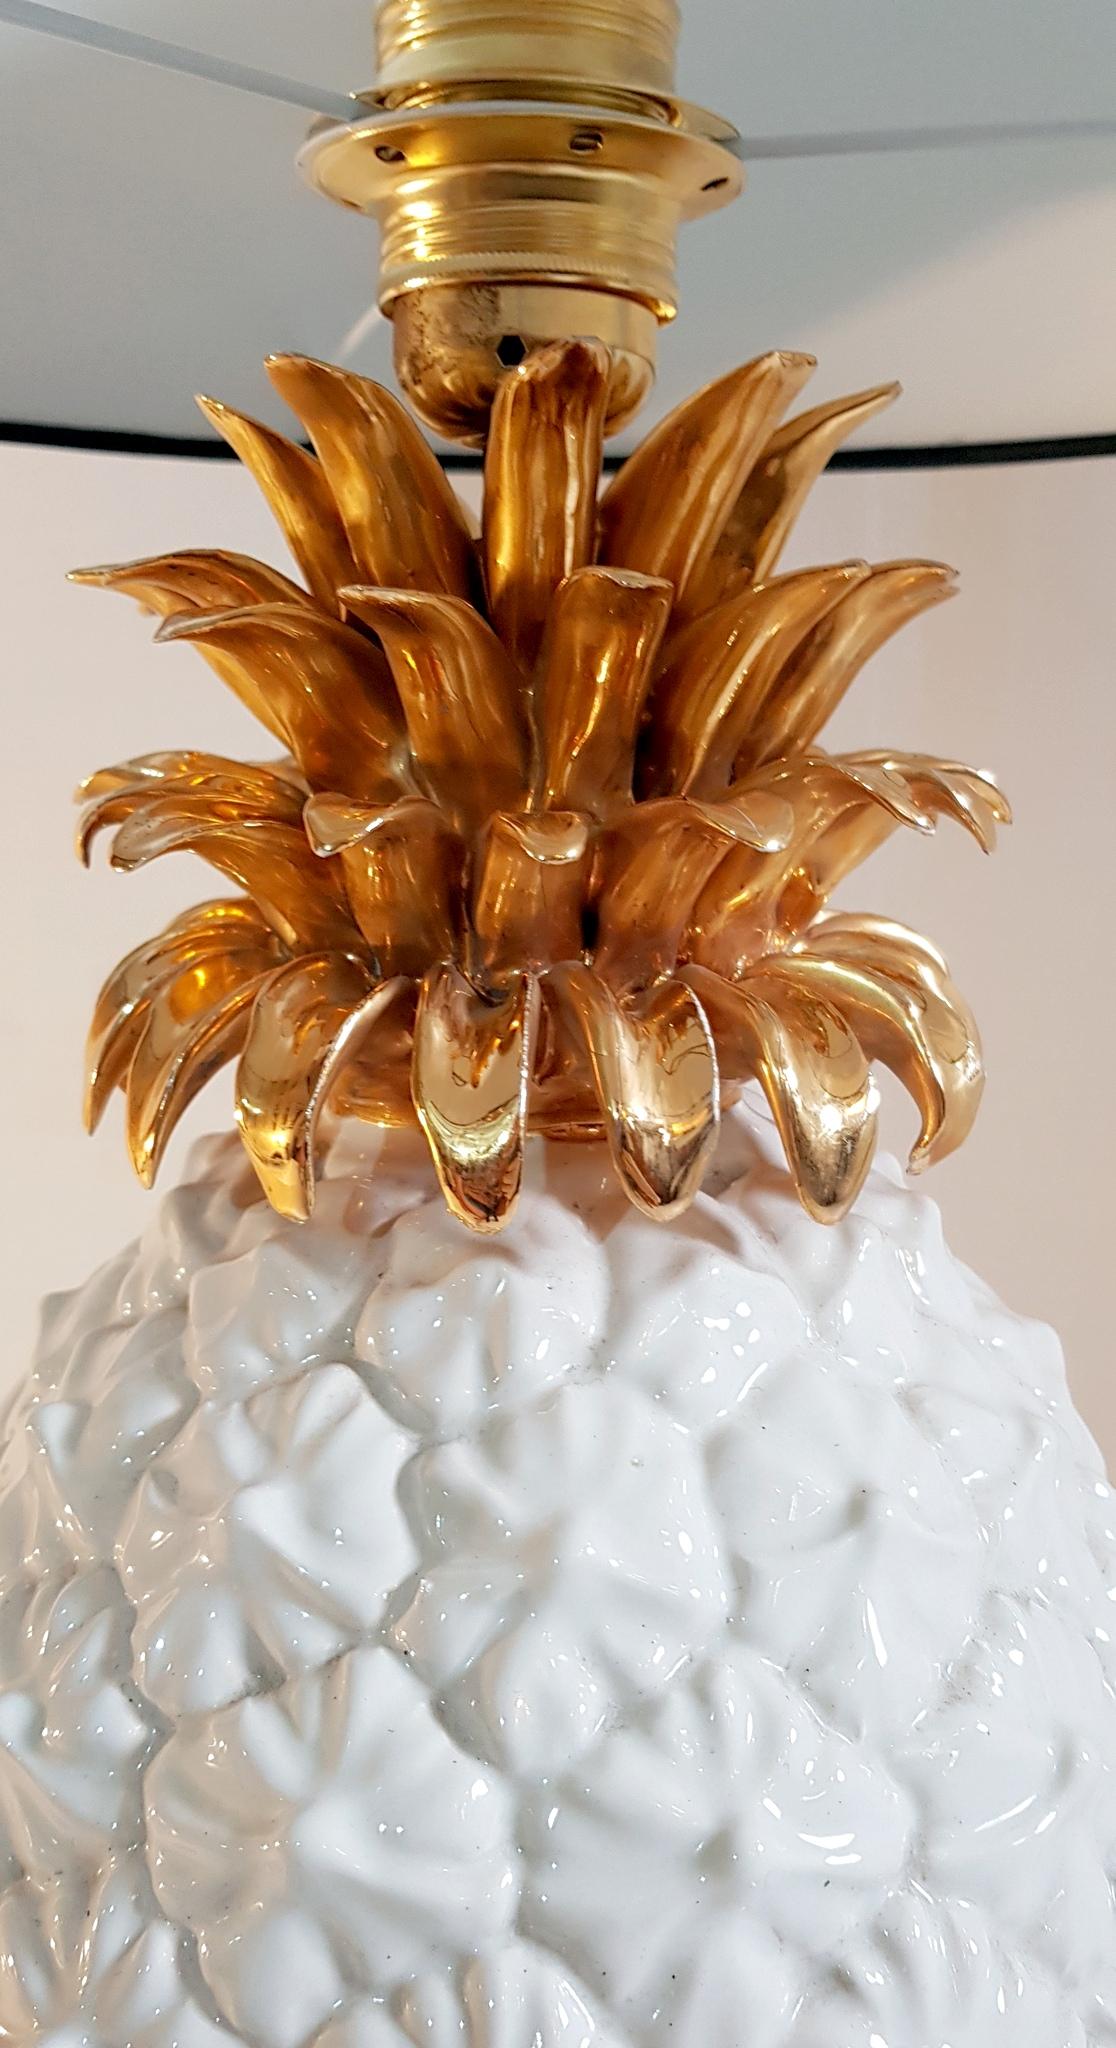 Mid-Century Modern Ceramic Pineapple Table Lamp Made in Italy